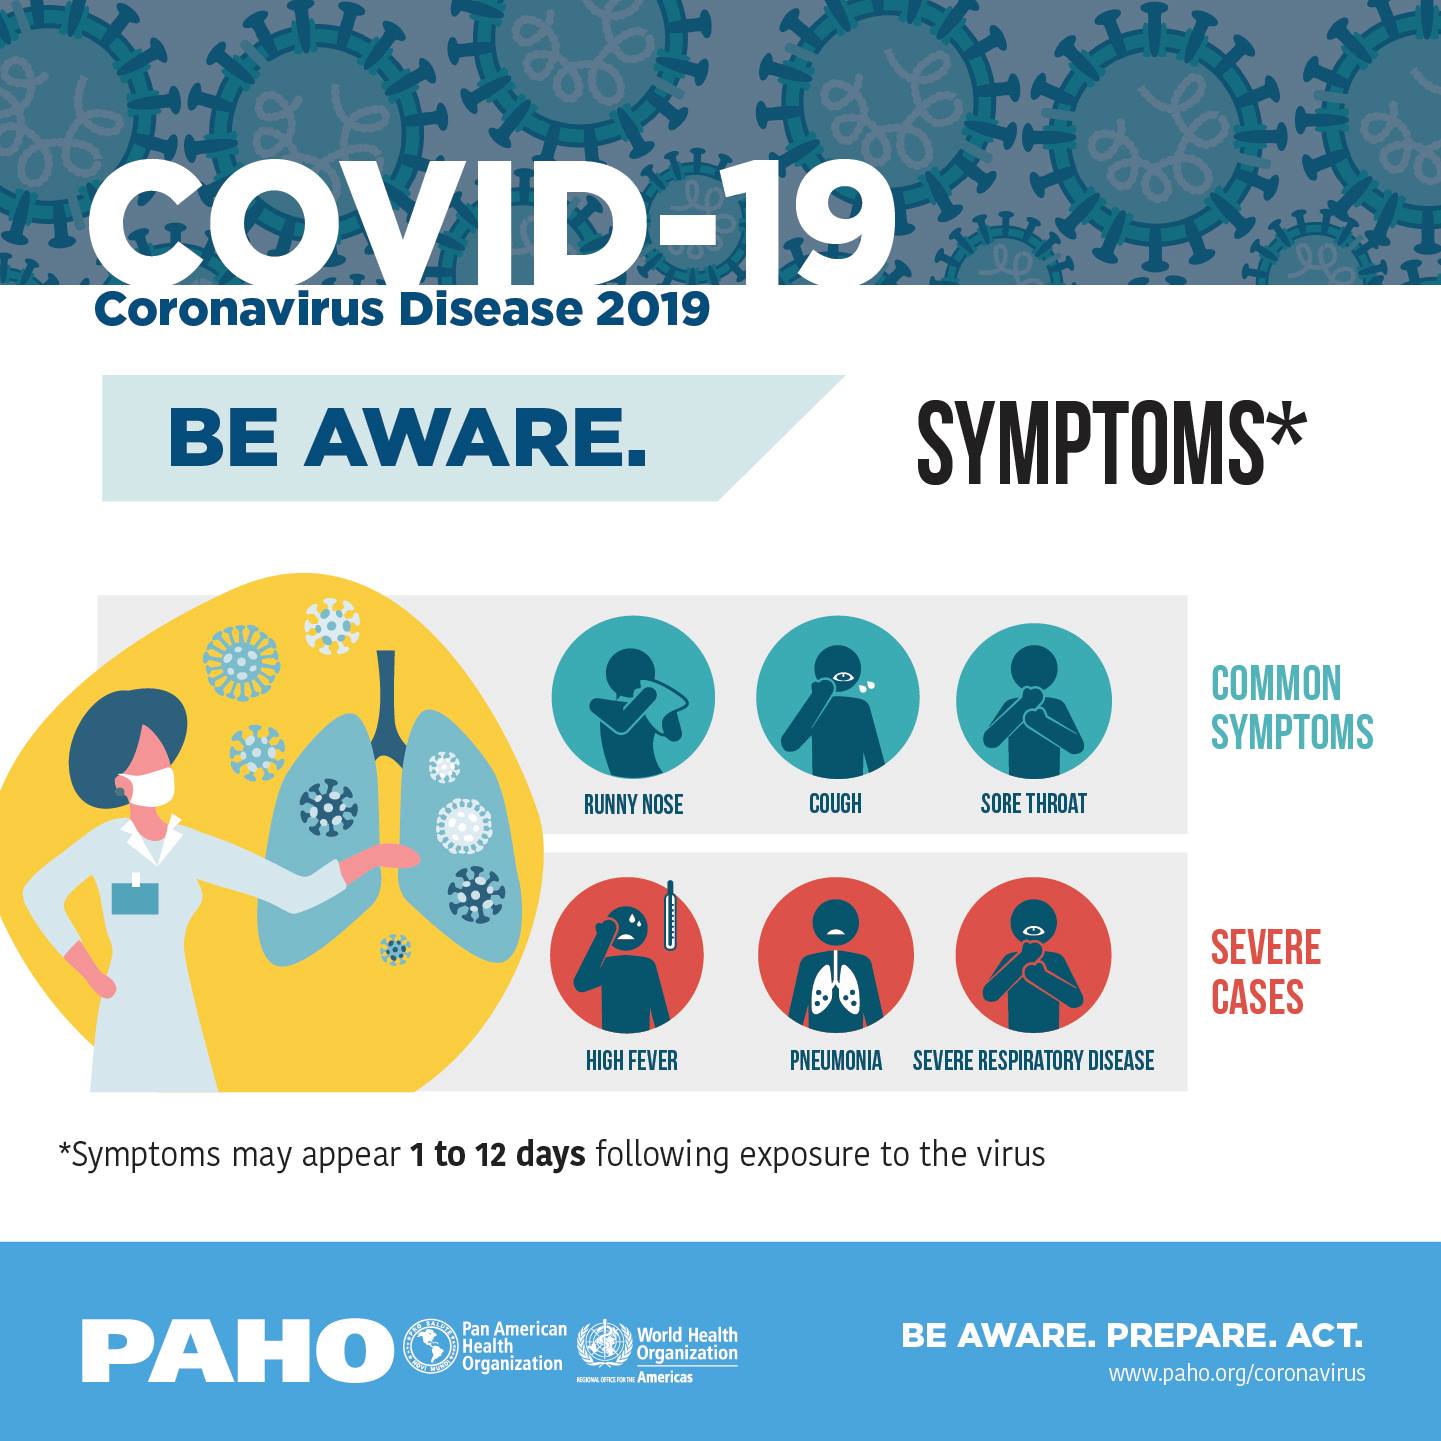 What Are The First Symptoms Of A COVID-19 Infection